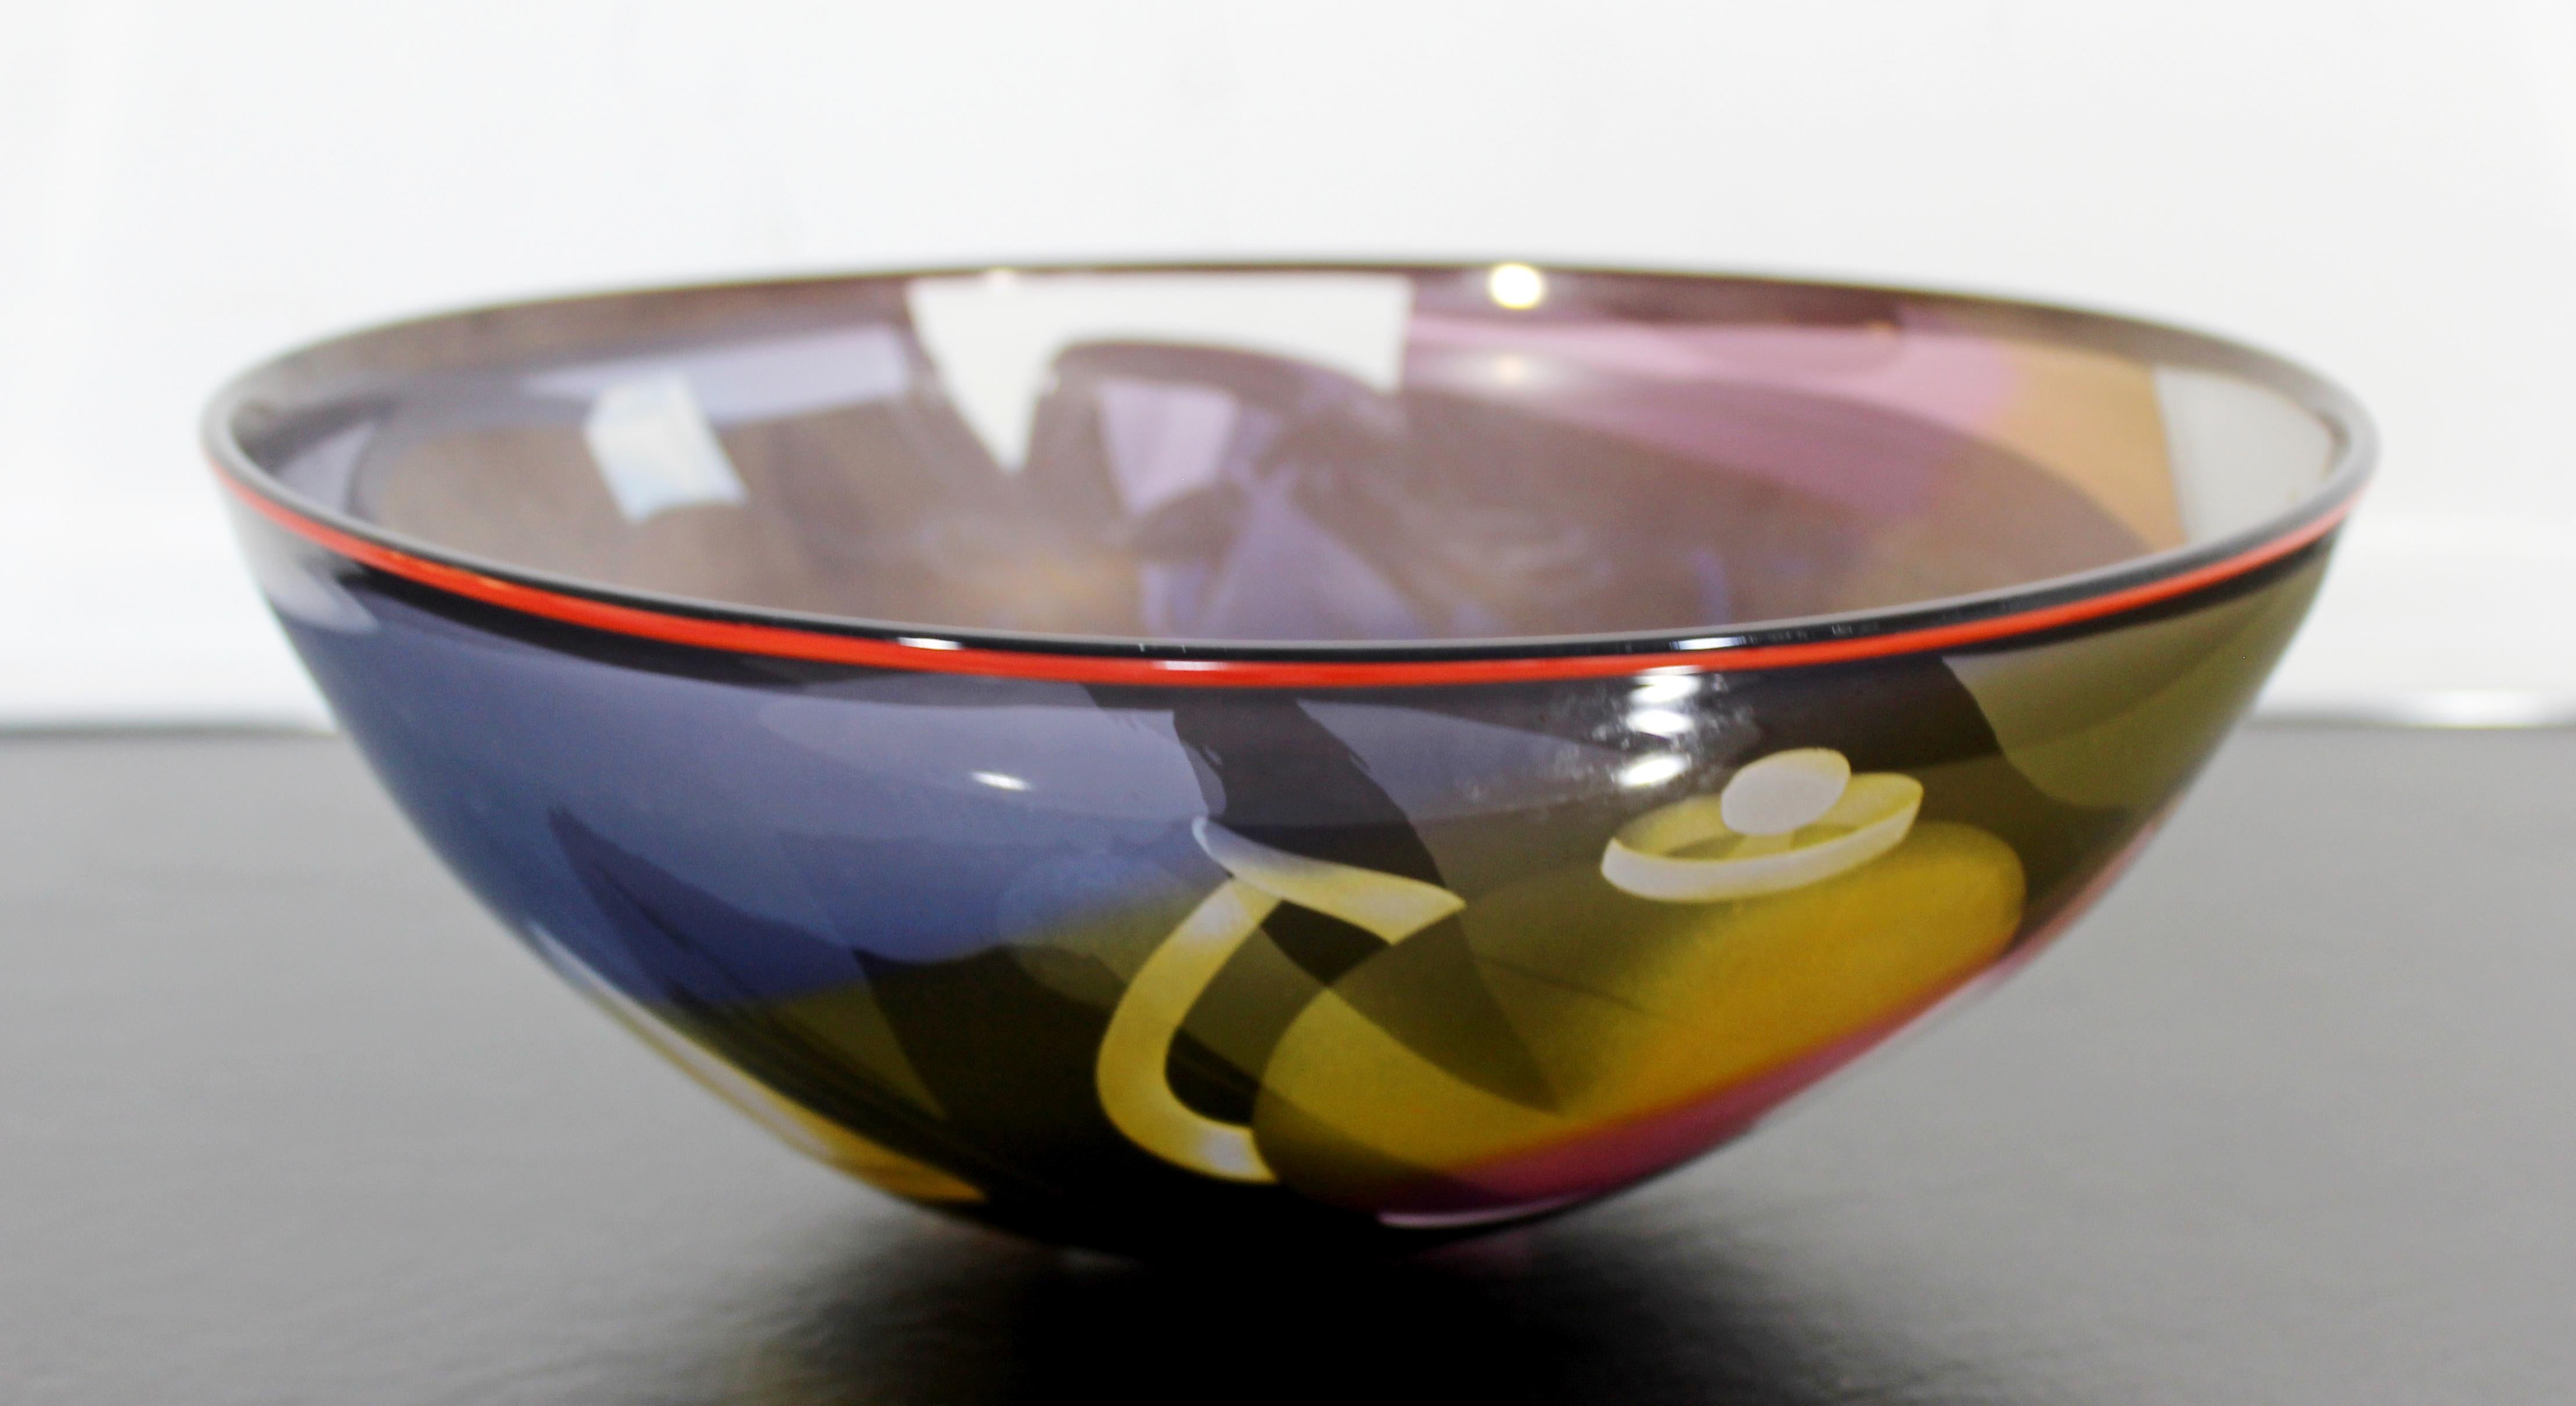 For your consideration is a gorgeous, textured glass art bowl or centerpiece, signed by Ann Warff/Wolff. In excellent condition. The dimensions are 12.5